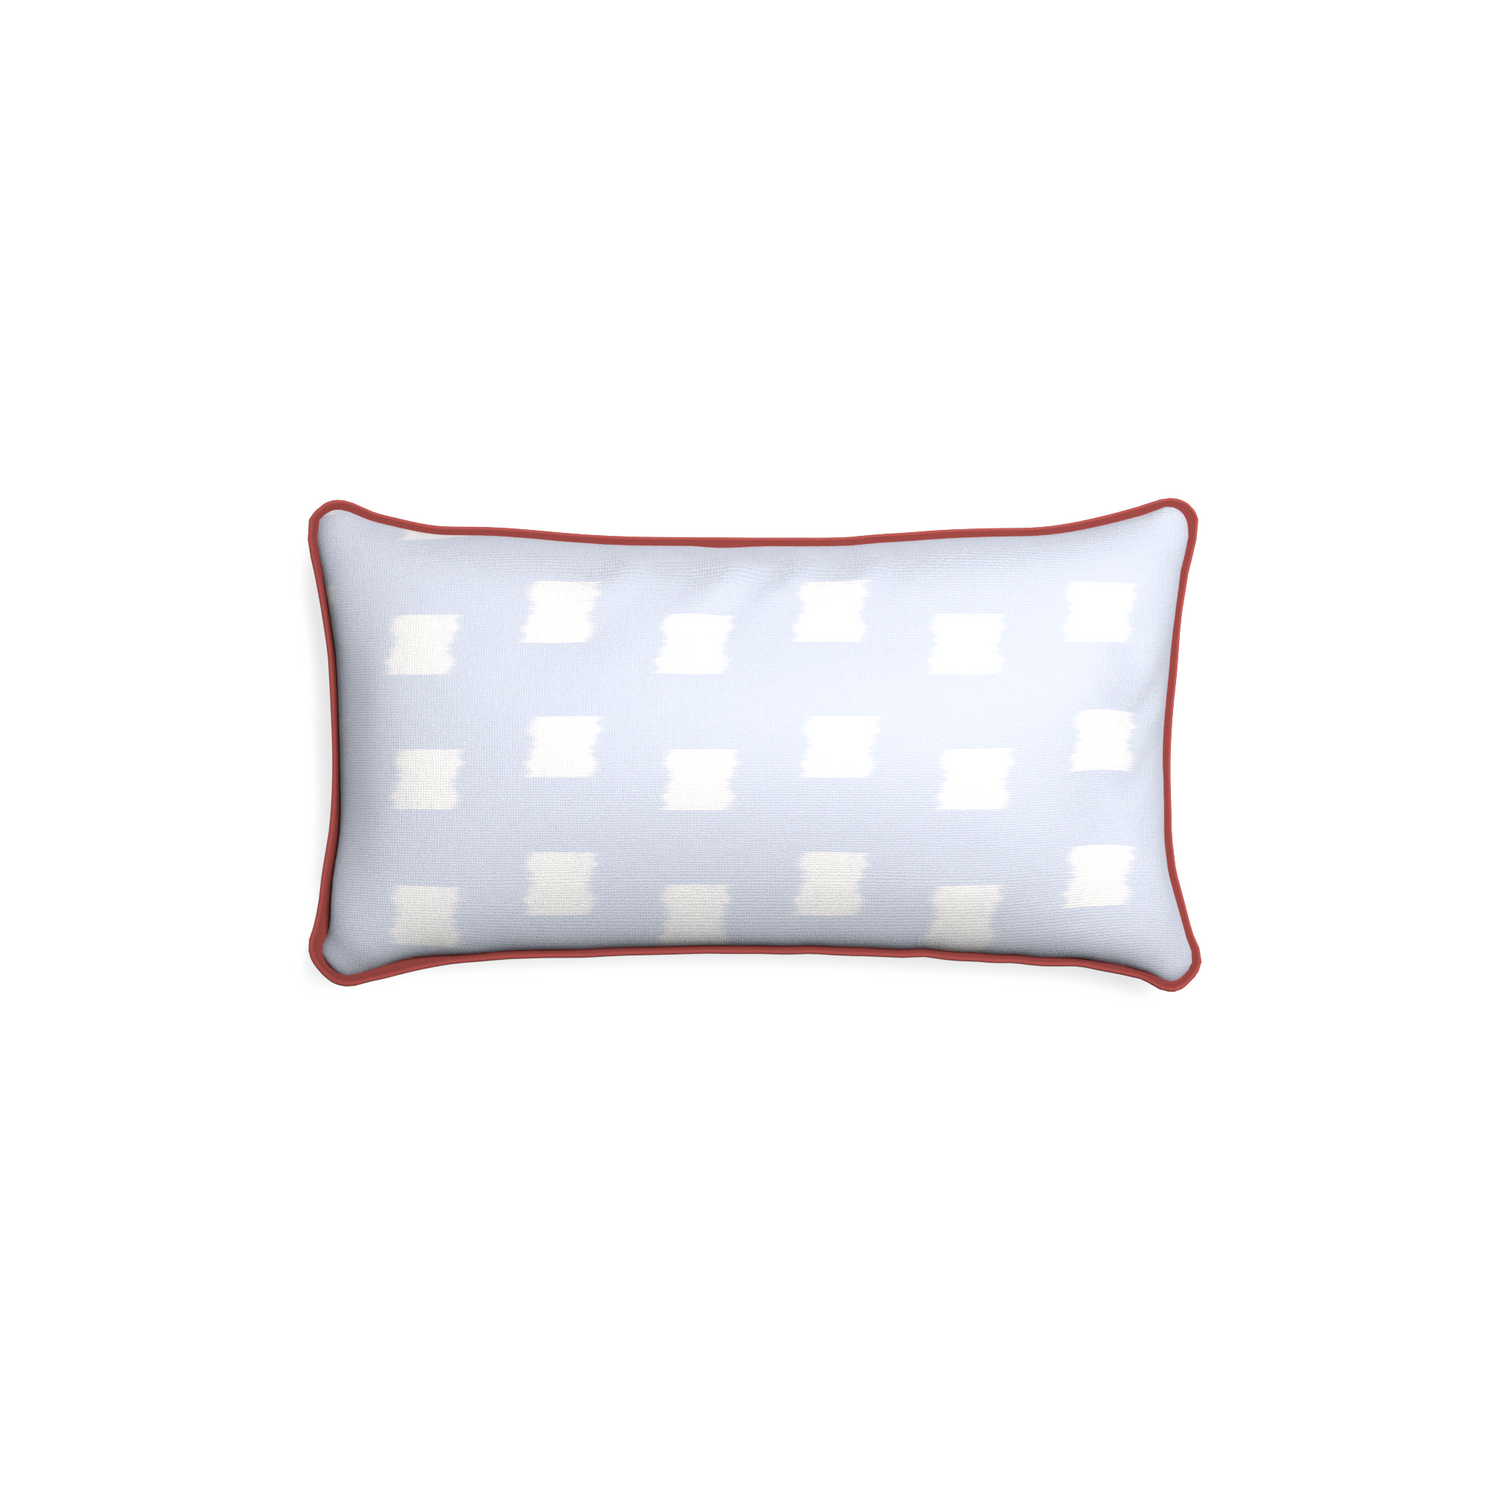 Petite-lumbar denton custom sky blue patternpillow with c piping on white background